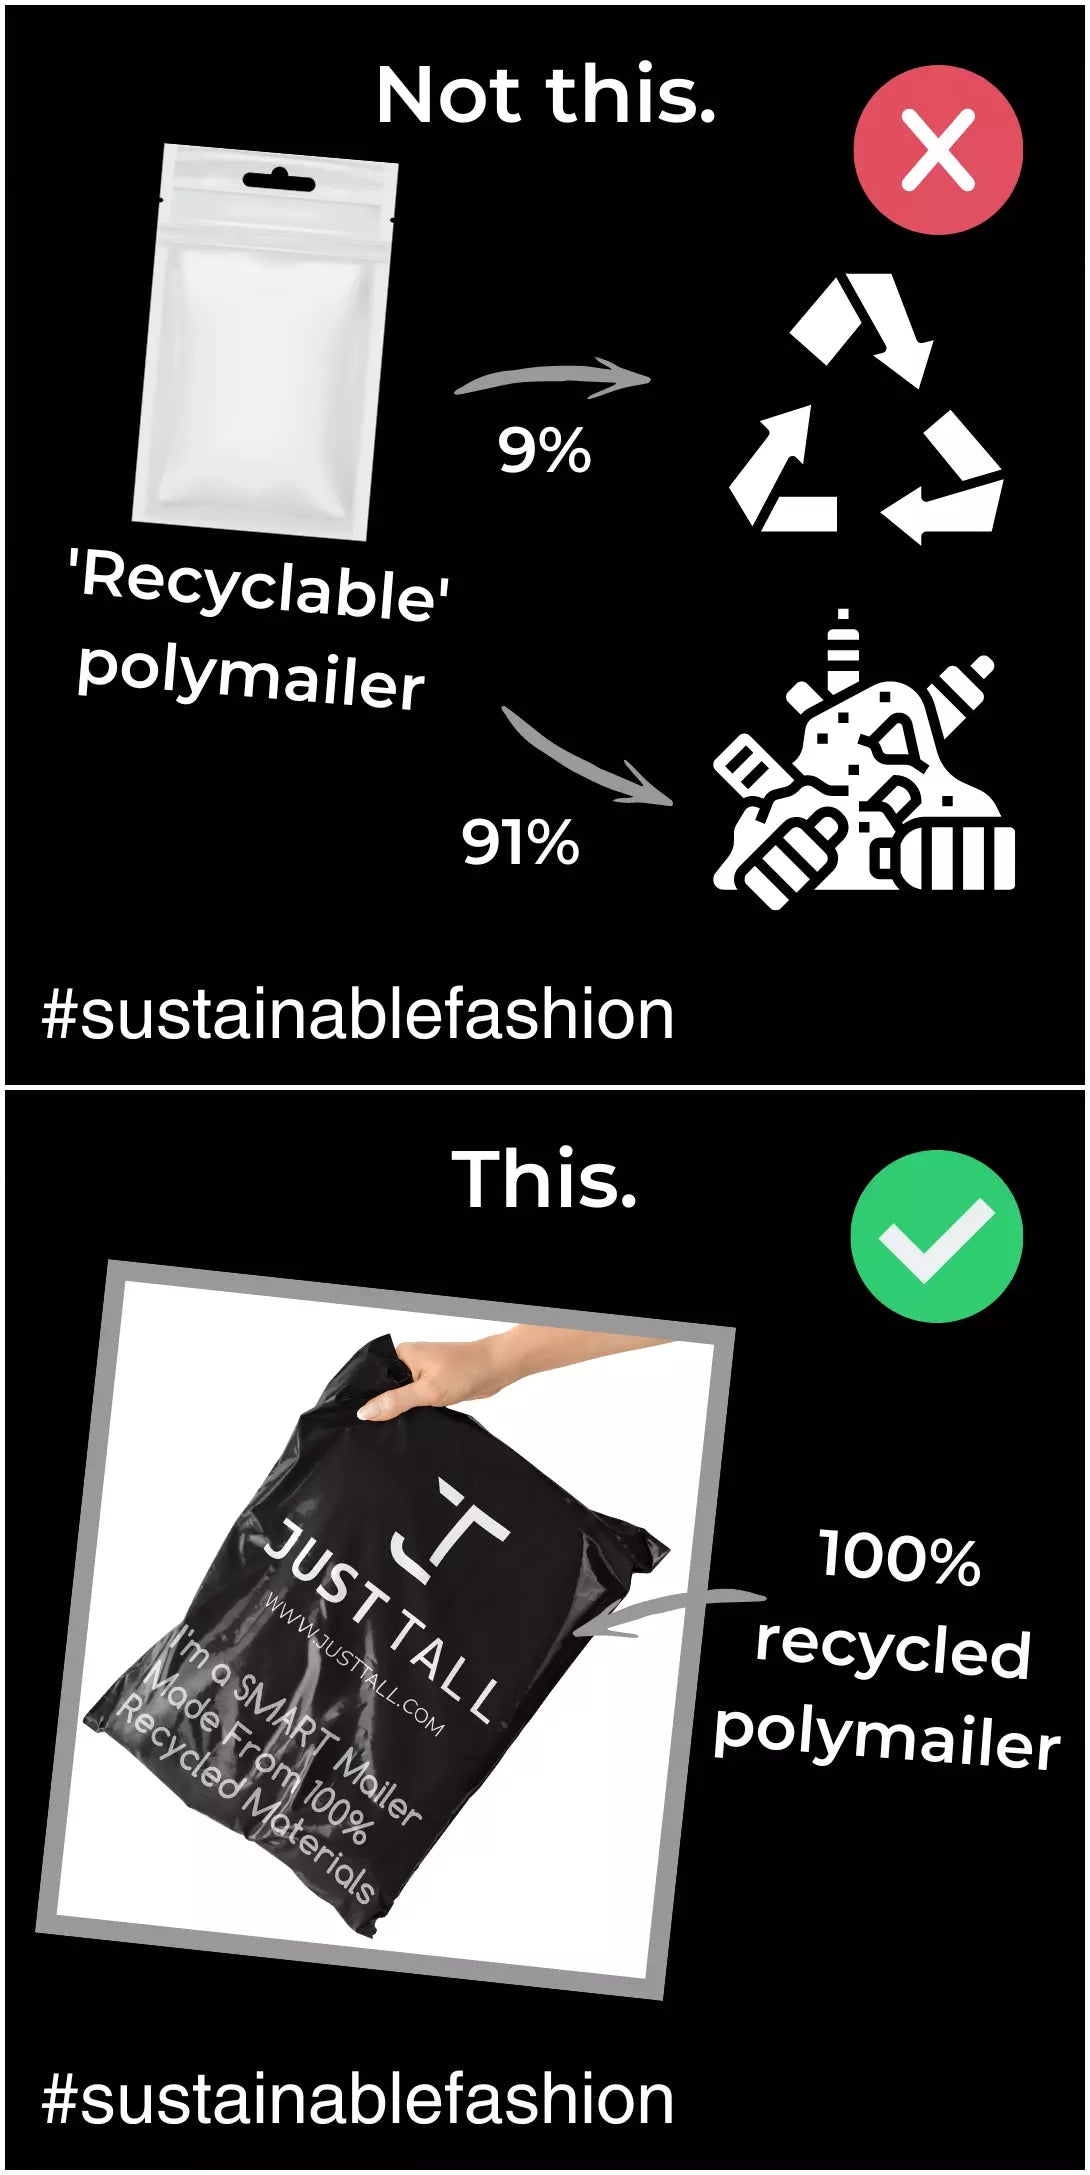 Our external poly mailers are 100% recycled plastic.